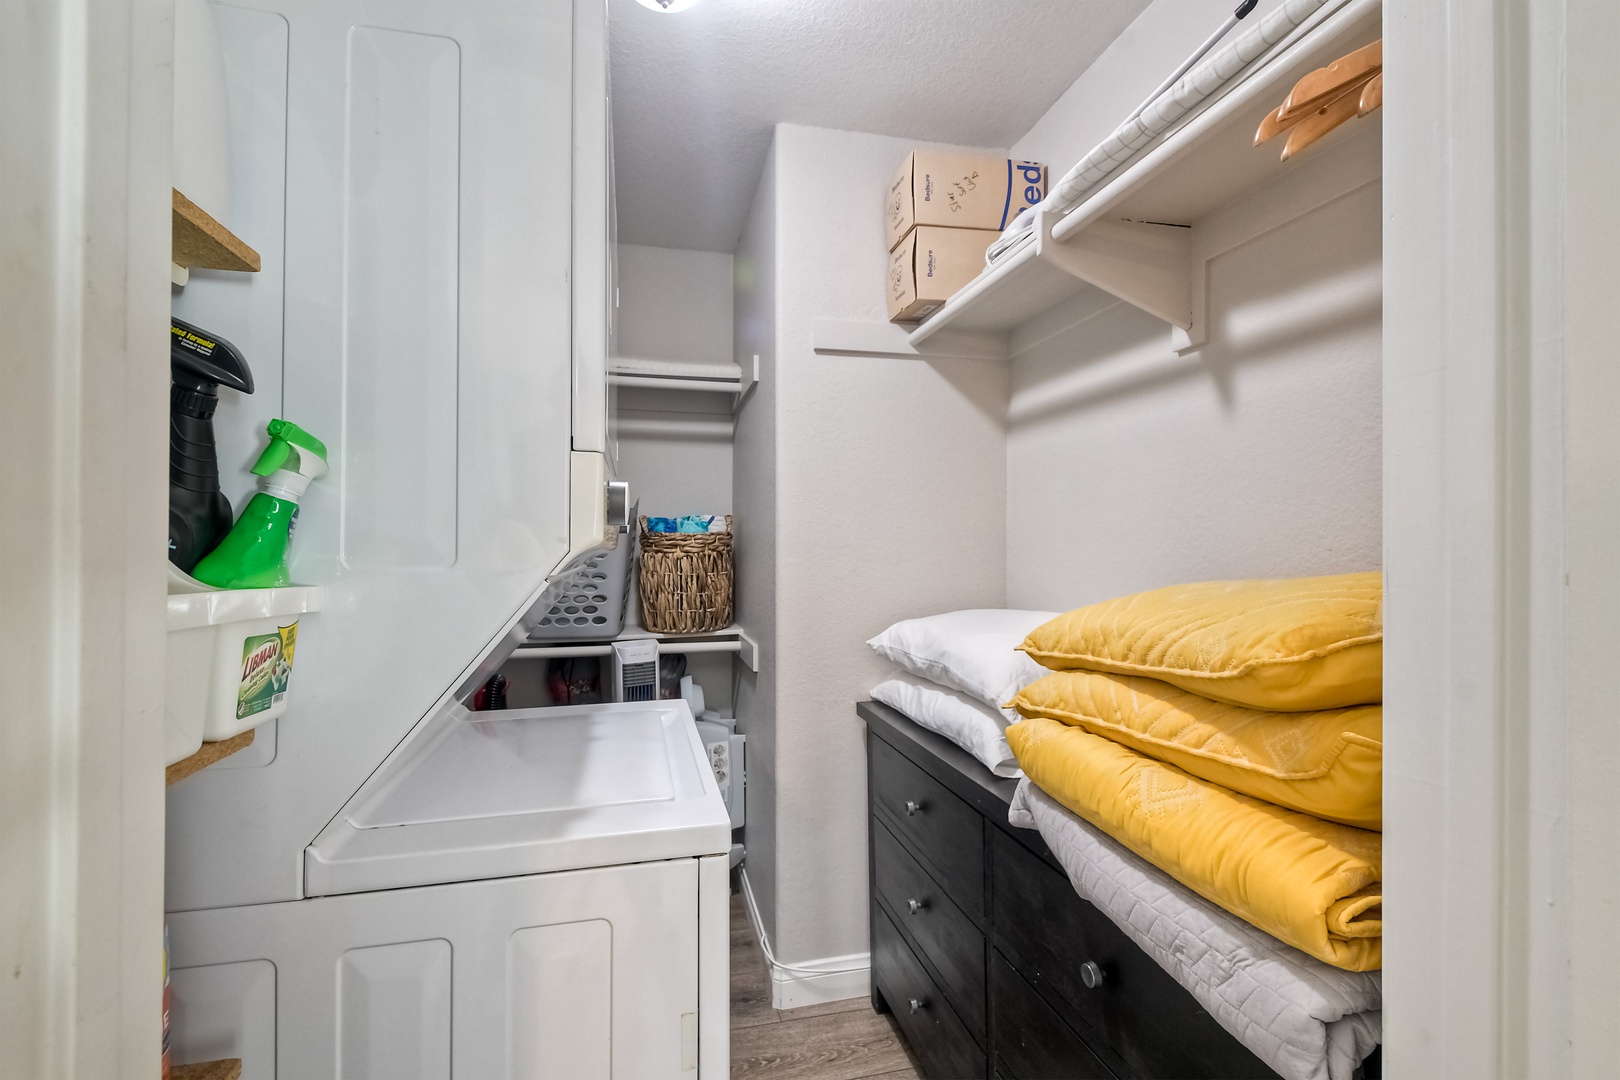 Private laundry facilites are tucked away in the bedroom closet